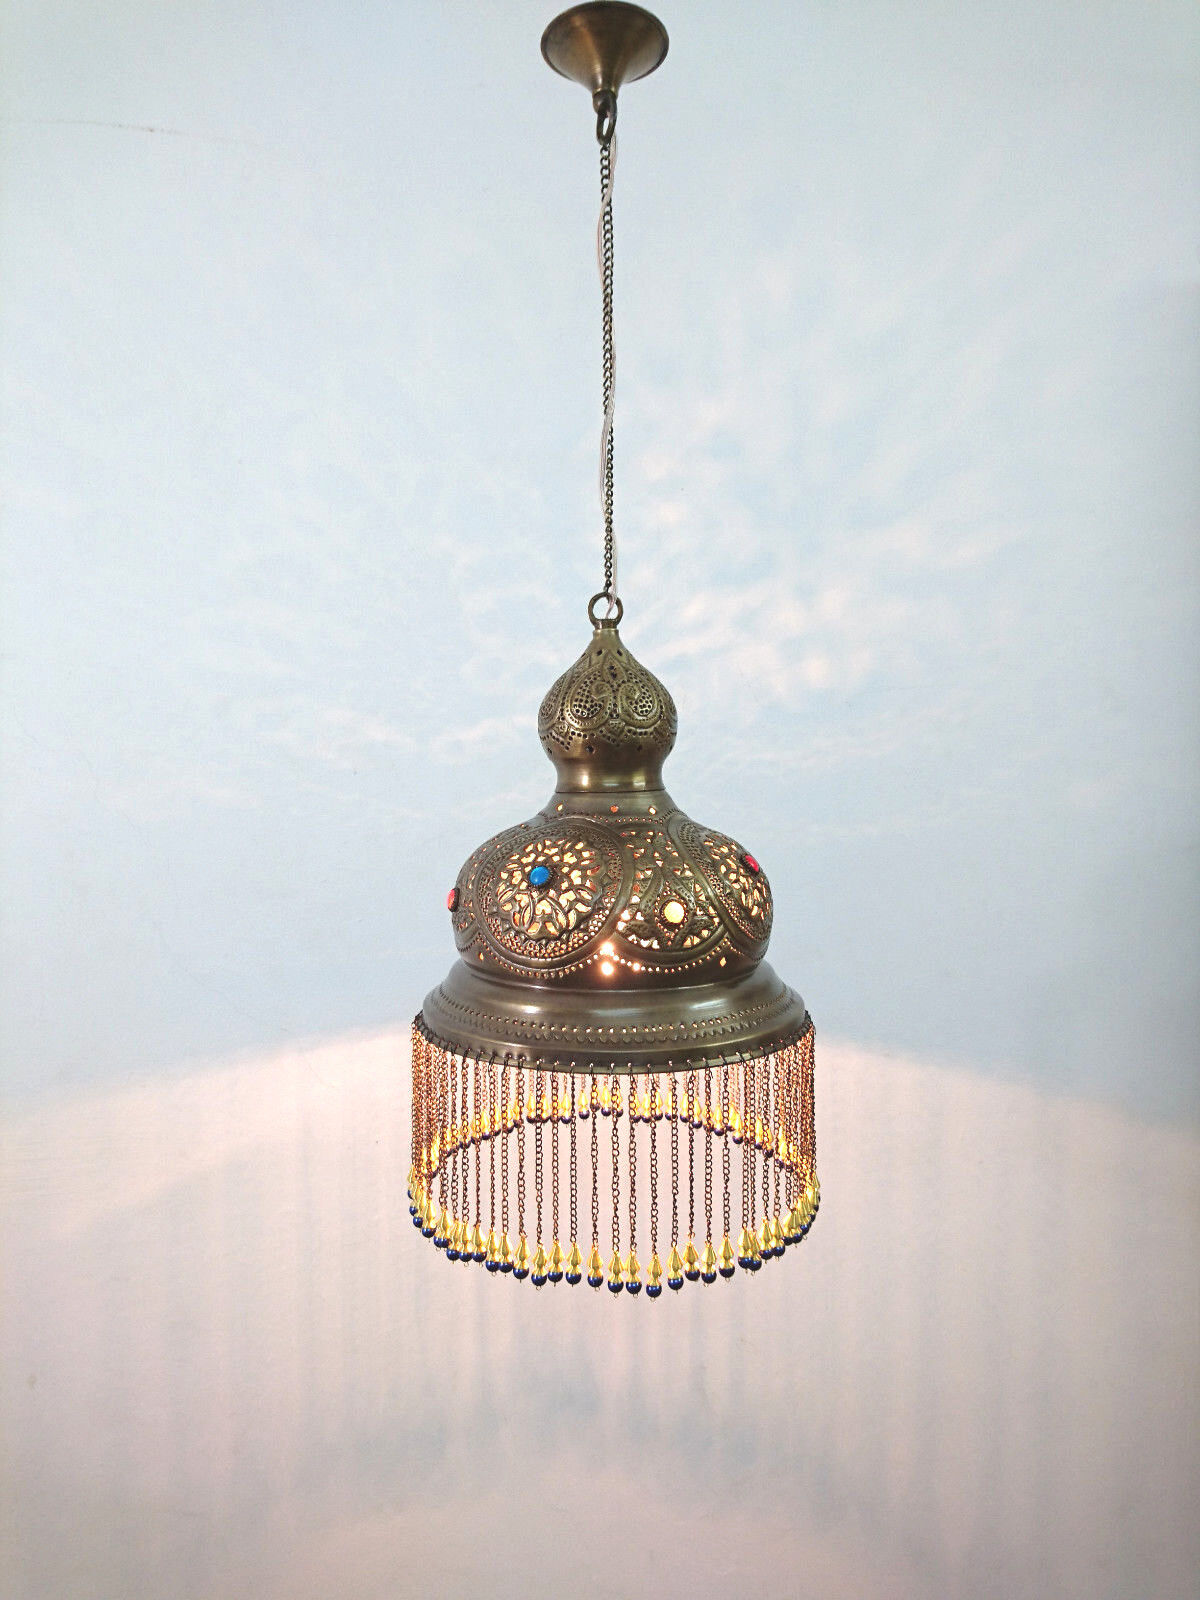 BR393 Antique Gold Finish Handmade Moroccan Dome Hanging Lampshade